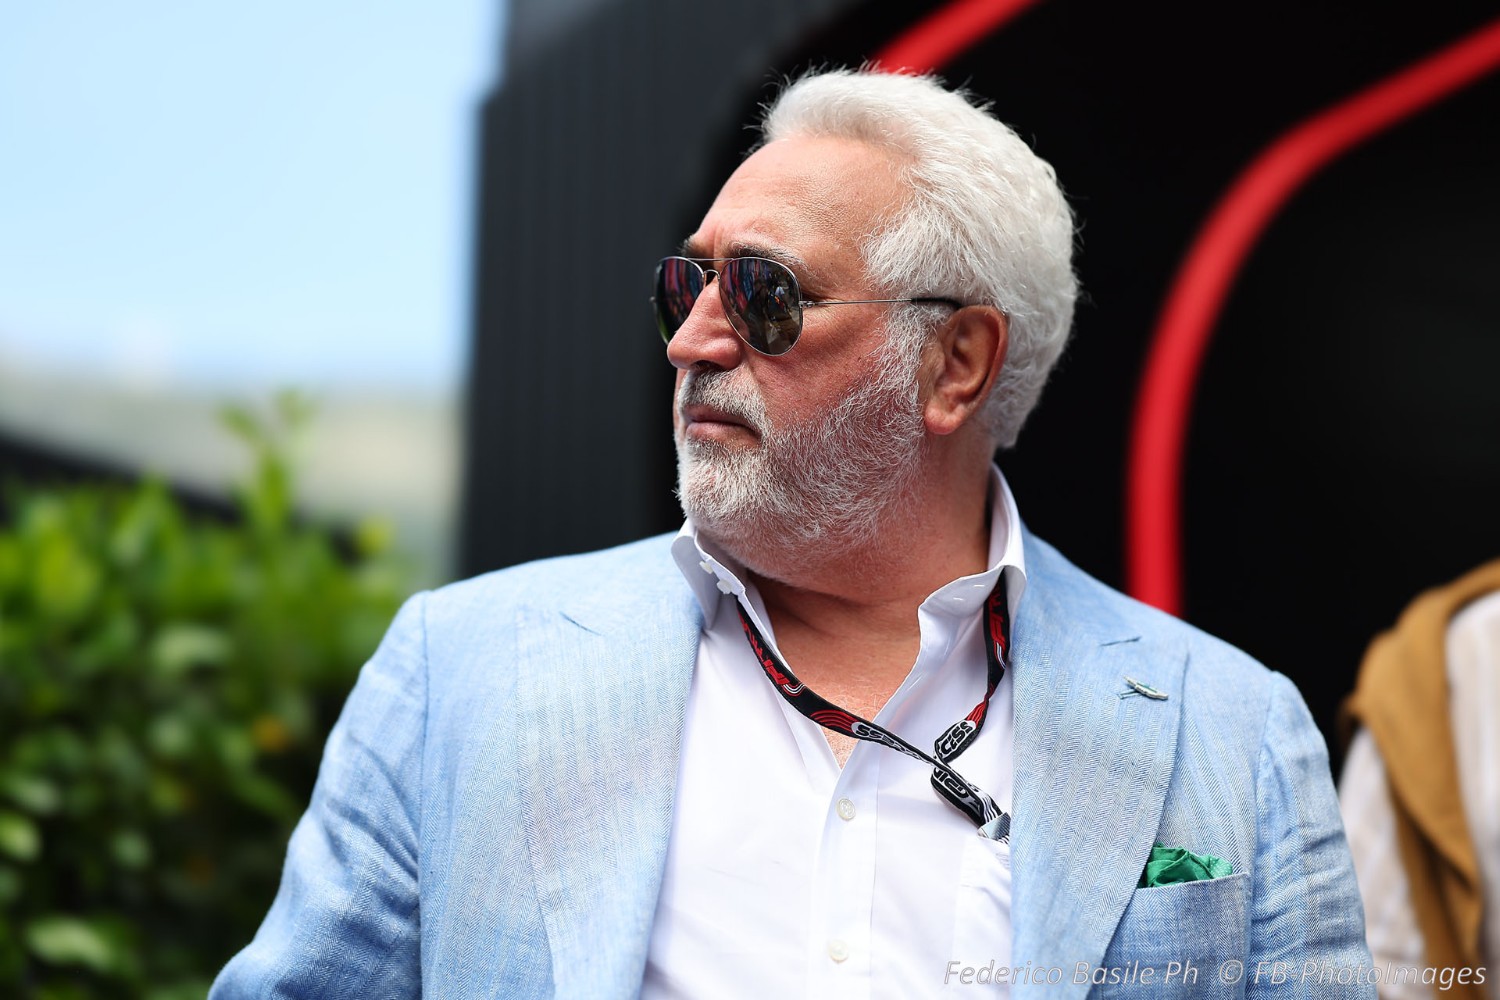 Lawrence Stroll owner of the Aston Martin Racing , and father of Lance Stroll during the Monaco GP, 25-28 May 2023 at Montecarlo, Formula 1 World championship 2023.